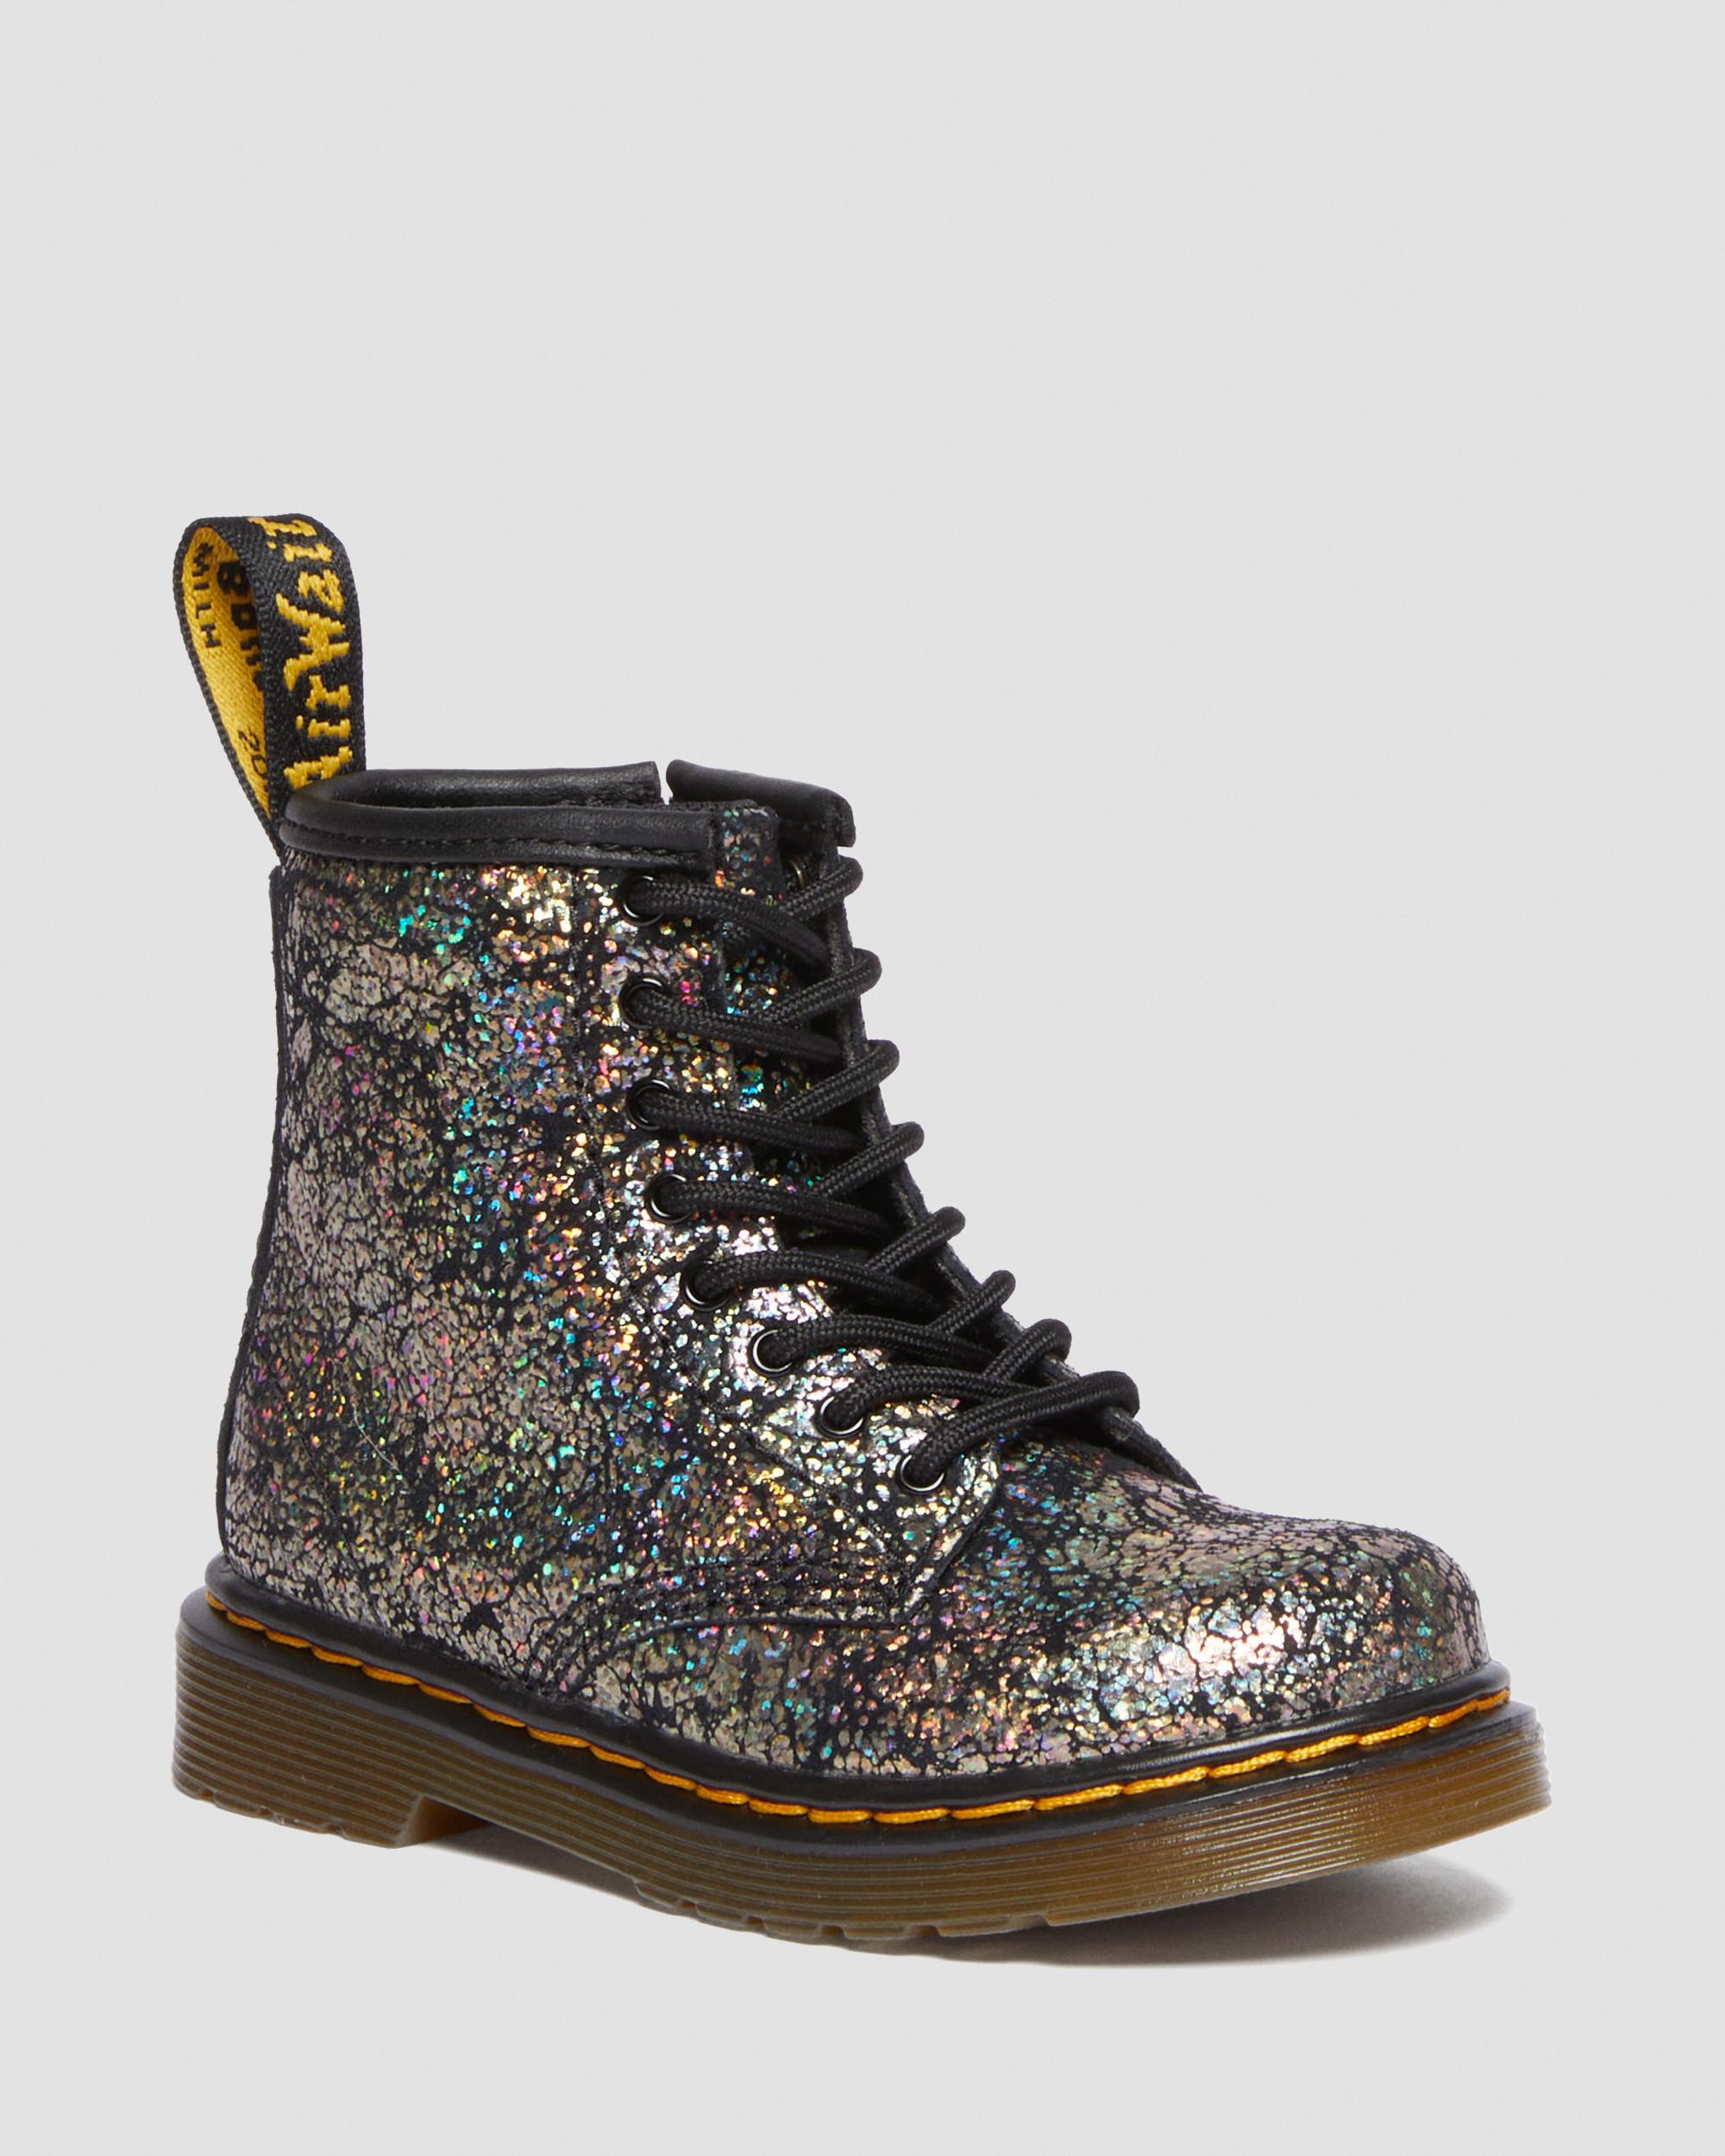 DR. MARTENS' TODDLER 1460 CRINKLE METALLIC LACE UP BOOTS